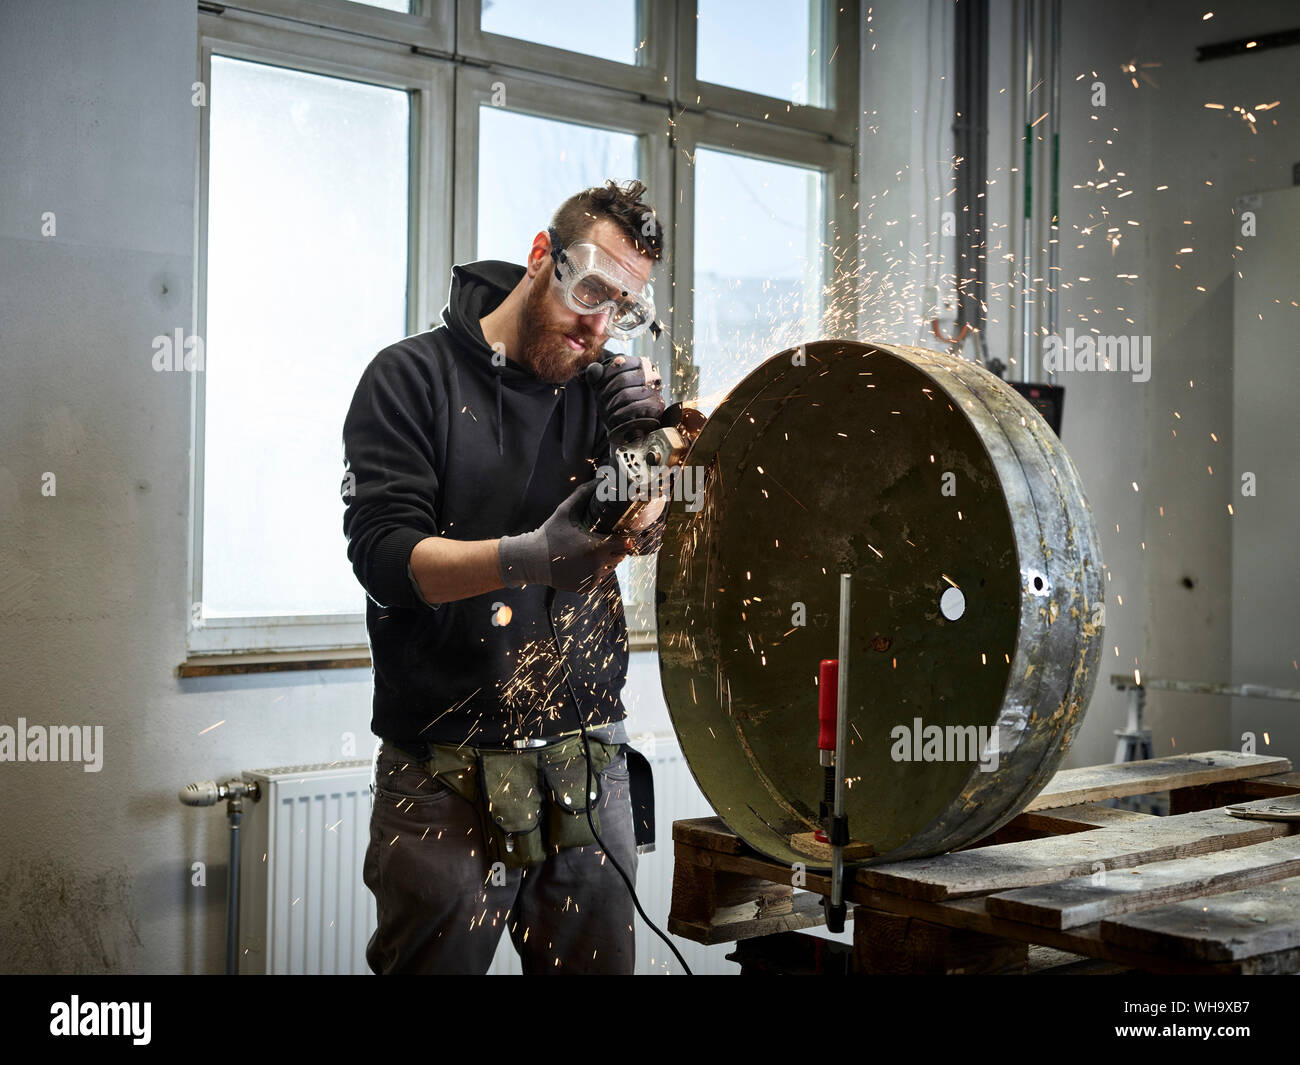 Man working on metal container with grinder Stock Photo